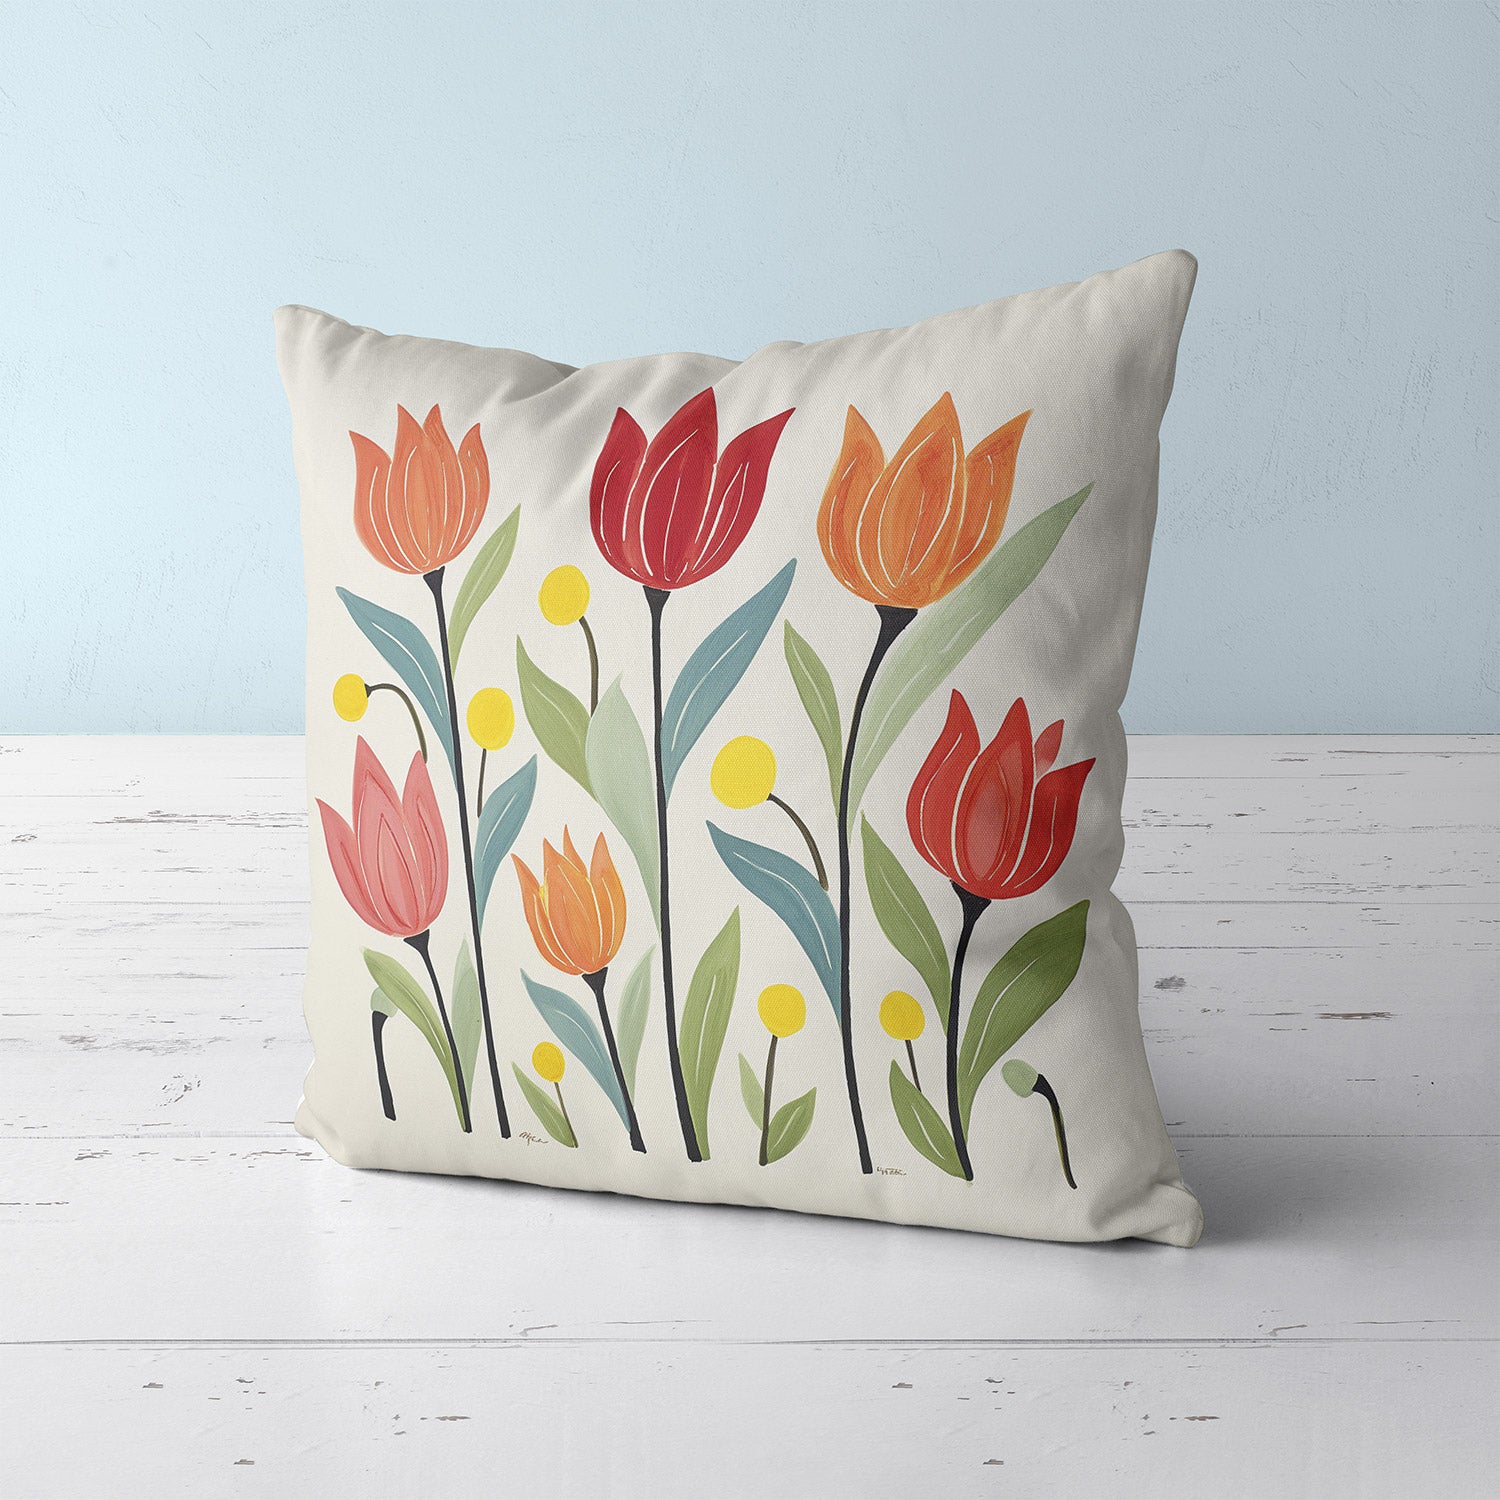 Feblilac Tulips Off-white Background Cushion Covers Throw Pillow Covers